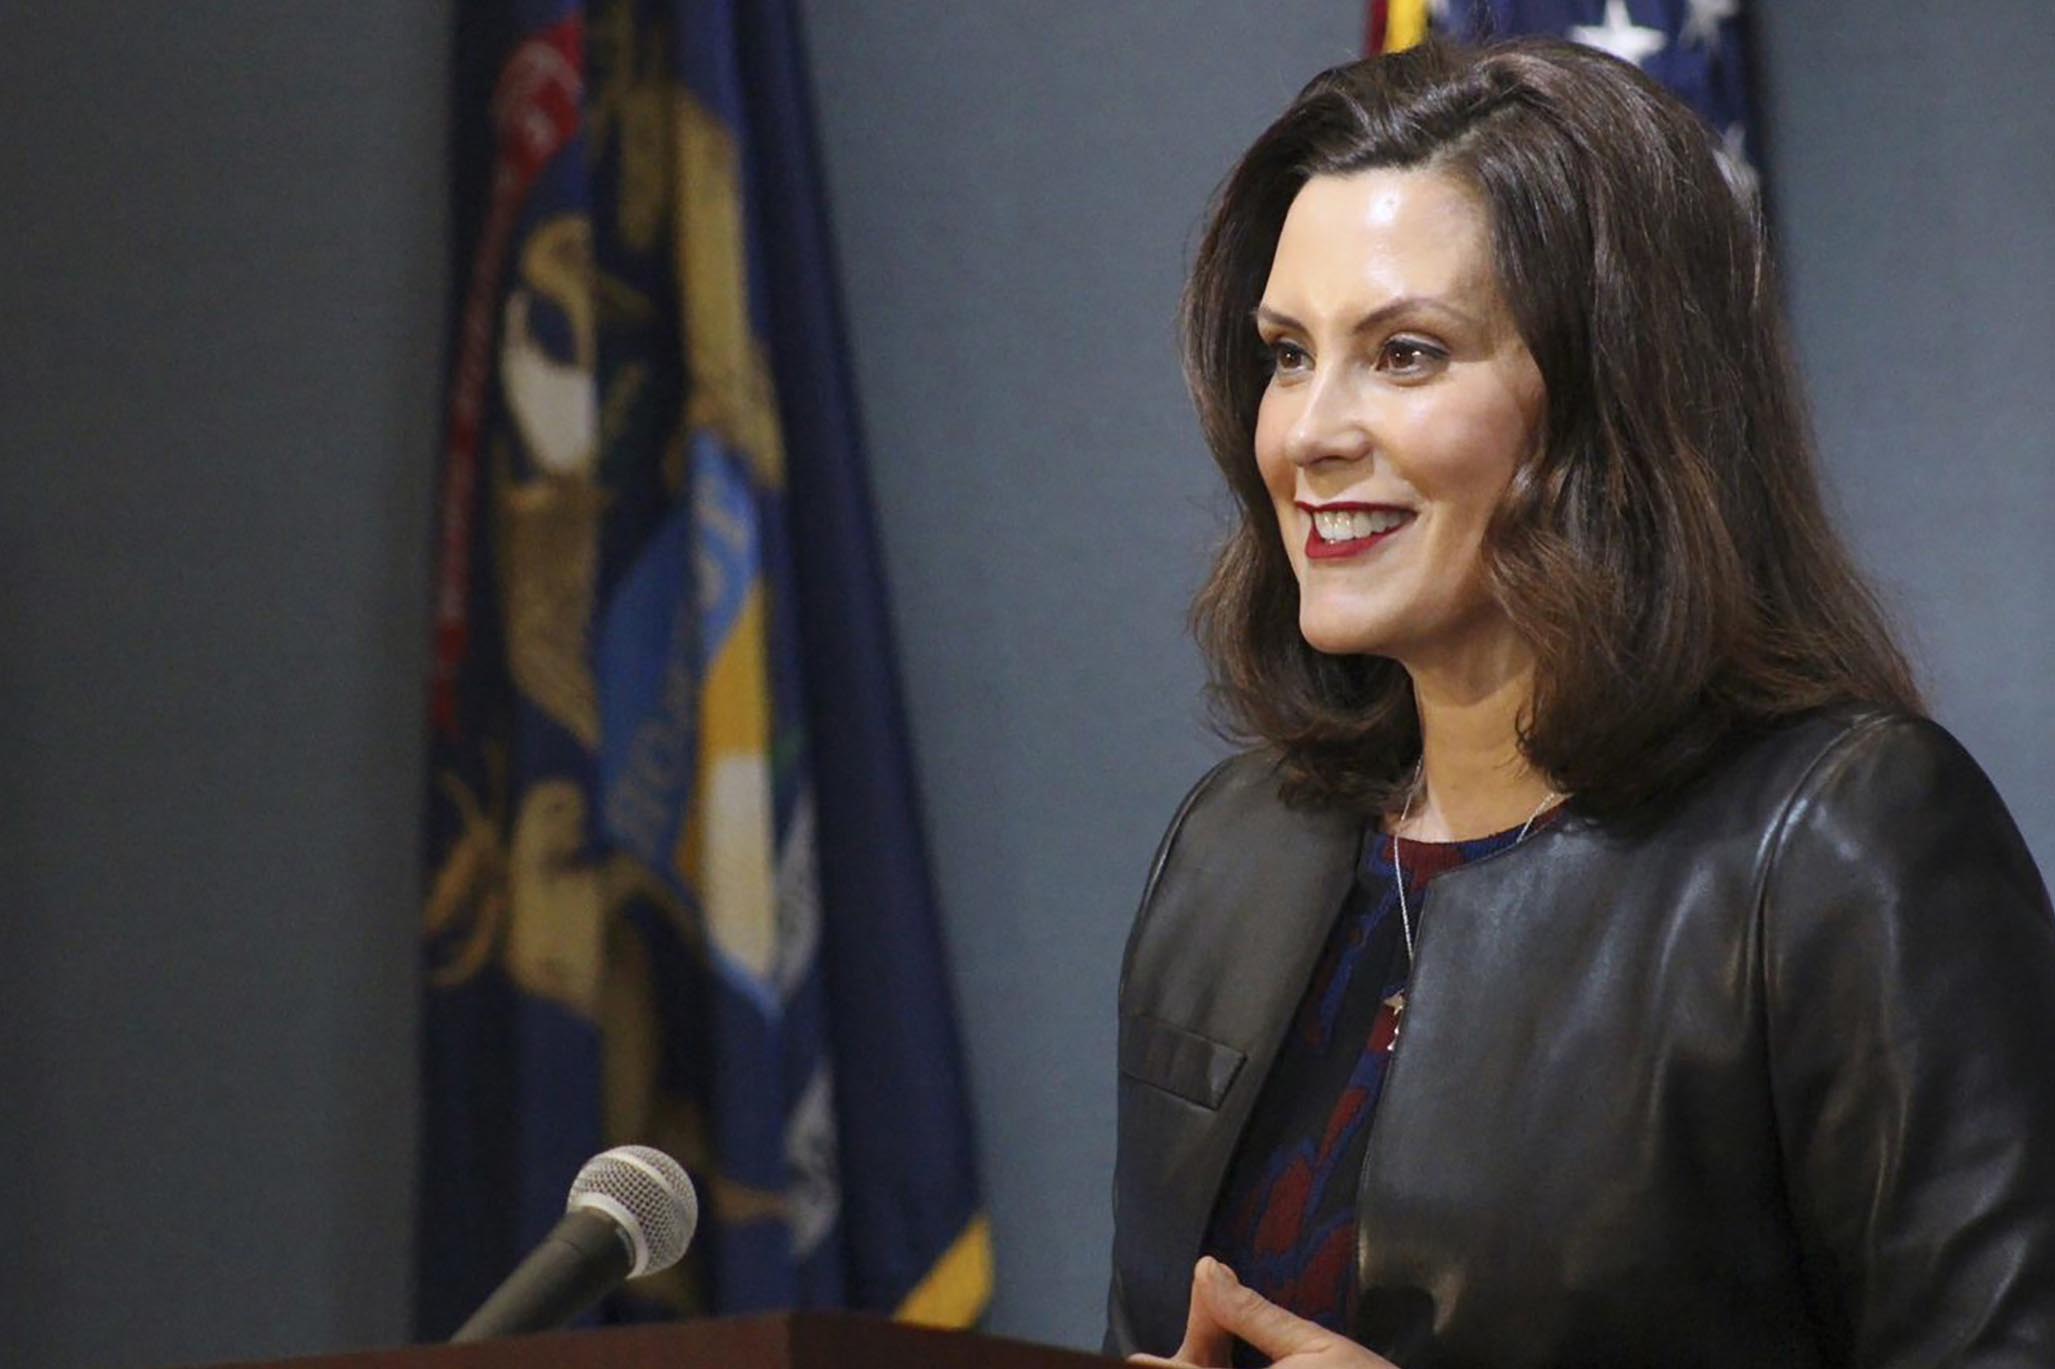 For Gretchen Whitmer, governing regardless of the potential political fallout